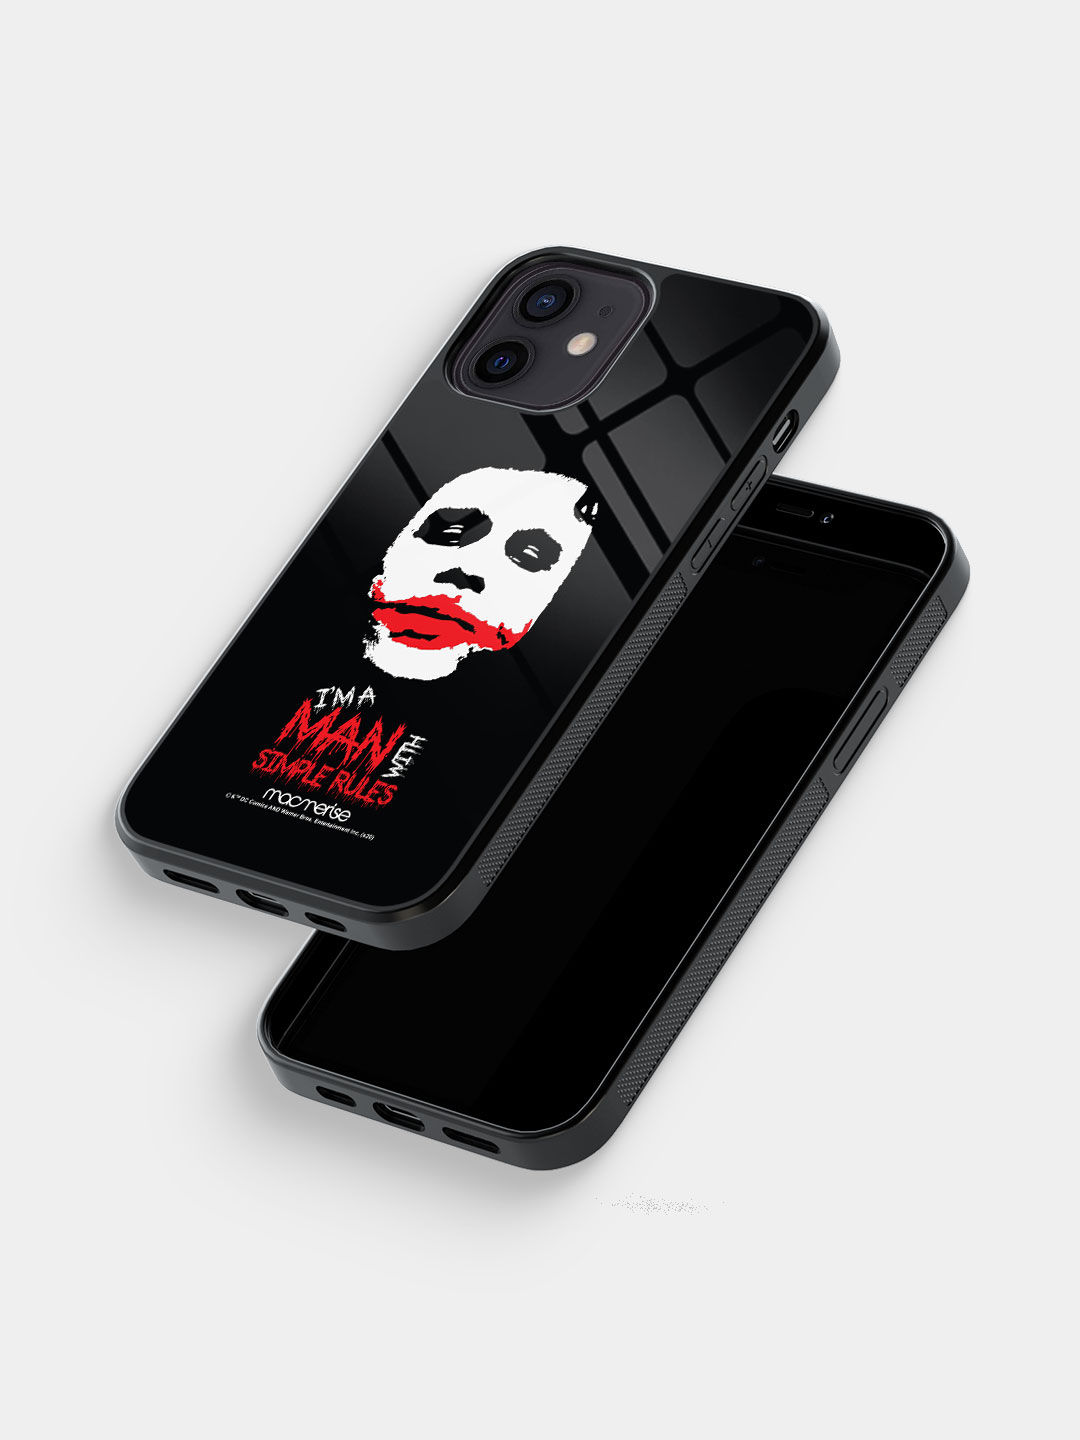 Man With Simple Rules - Glass Case For iPhone 12 Mini